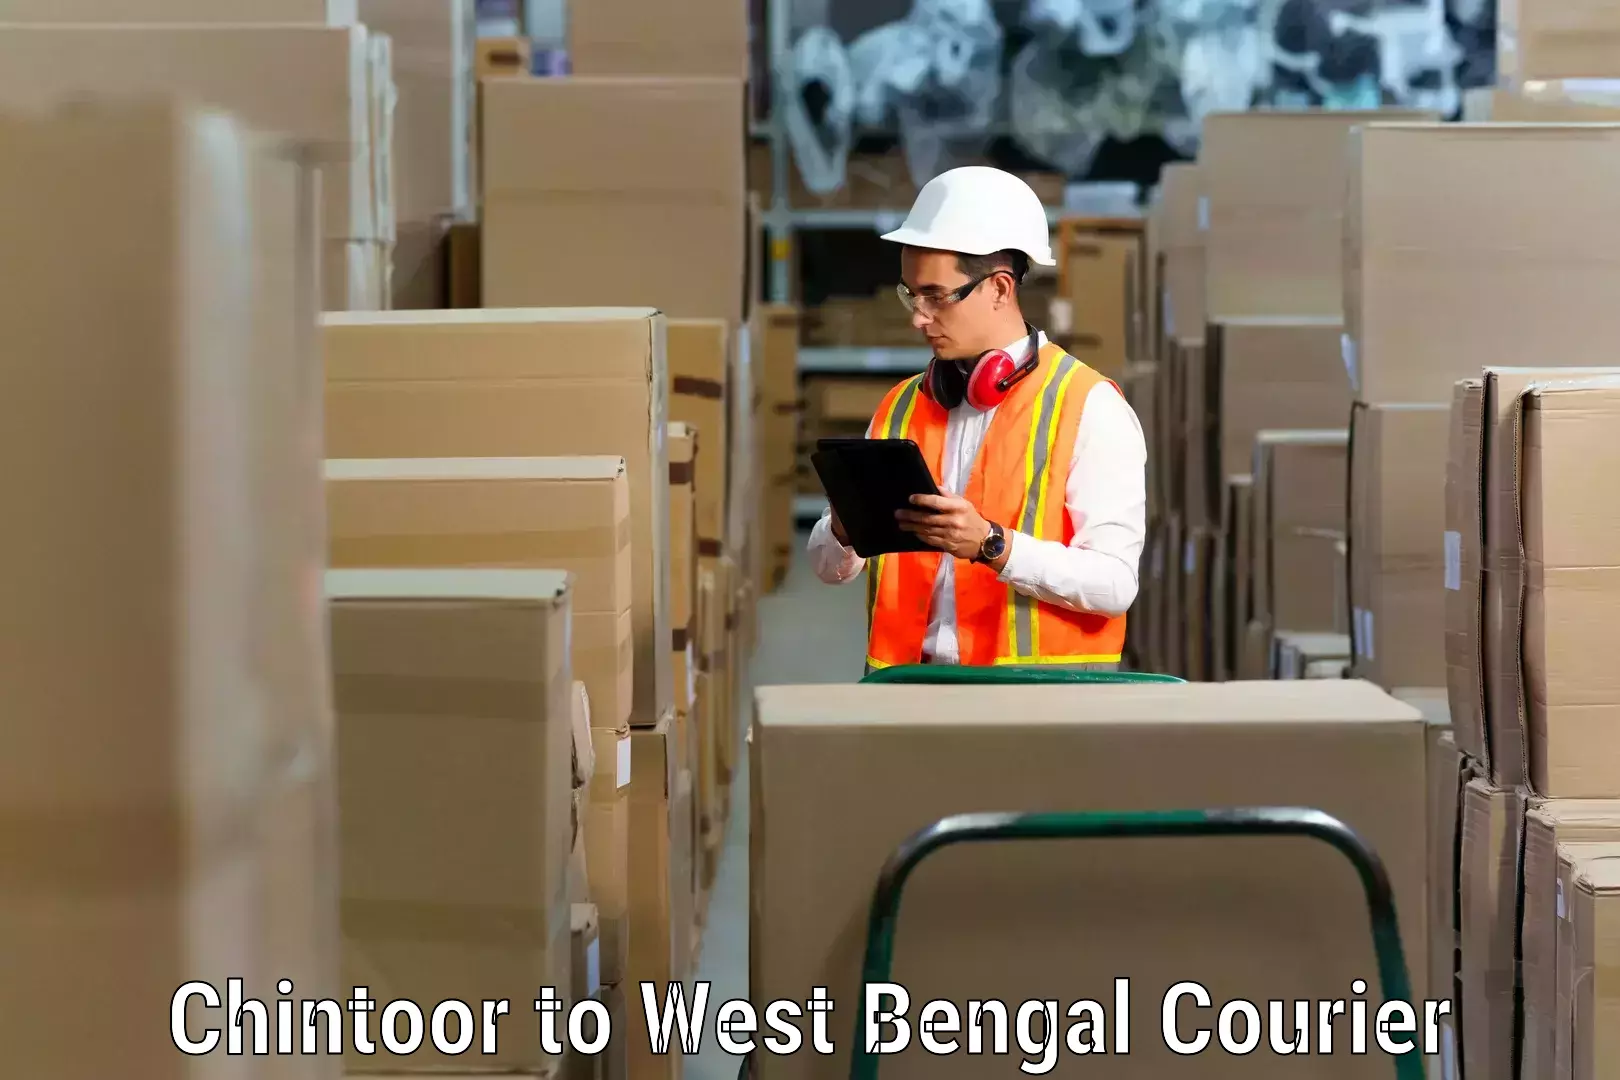 Household transport experts Chintoor to Bagdogra